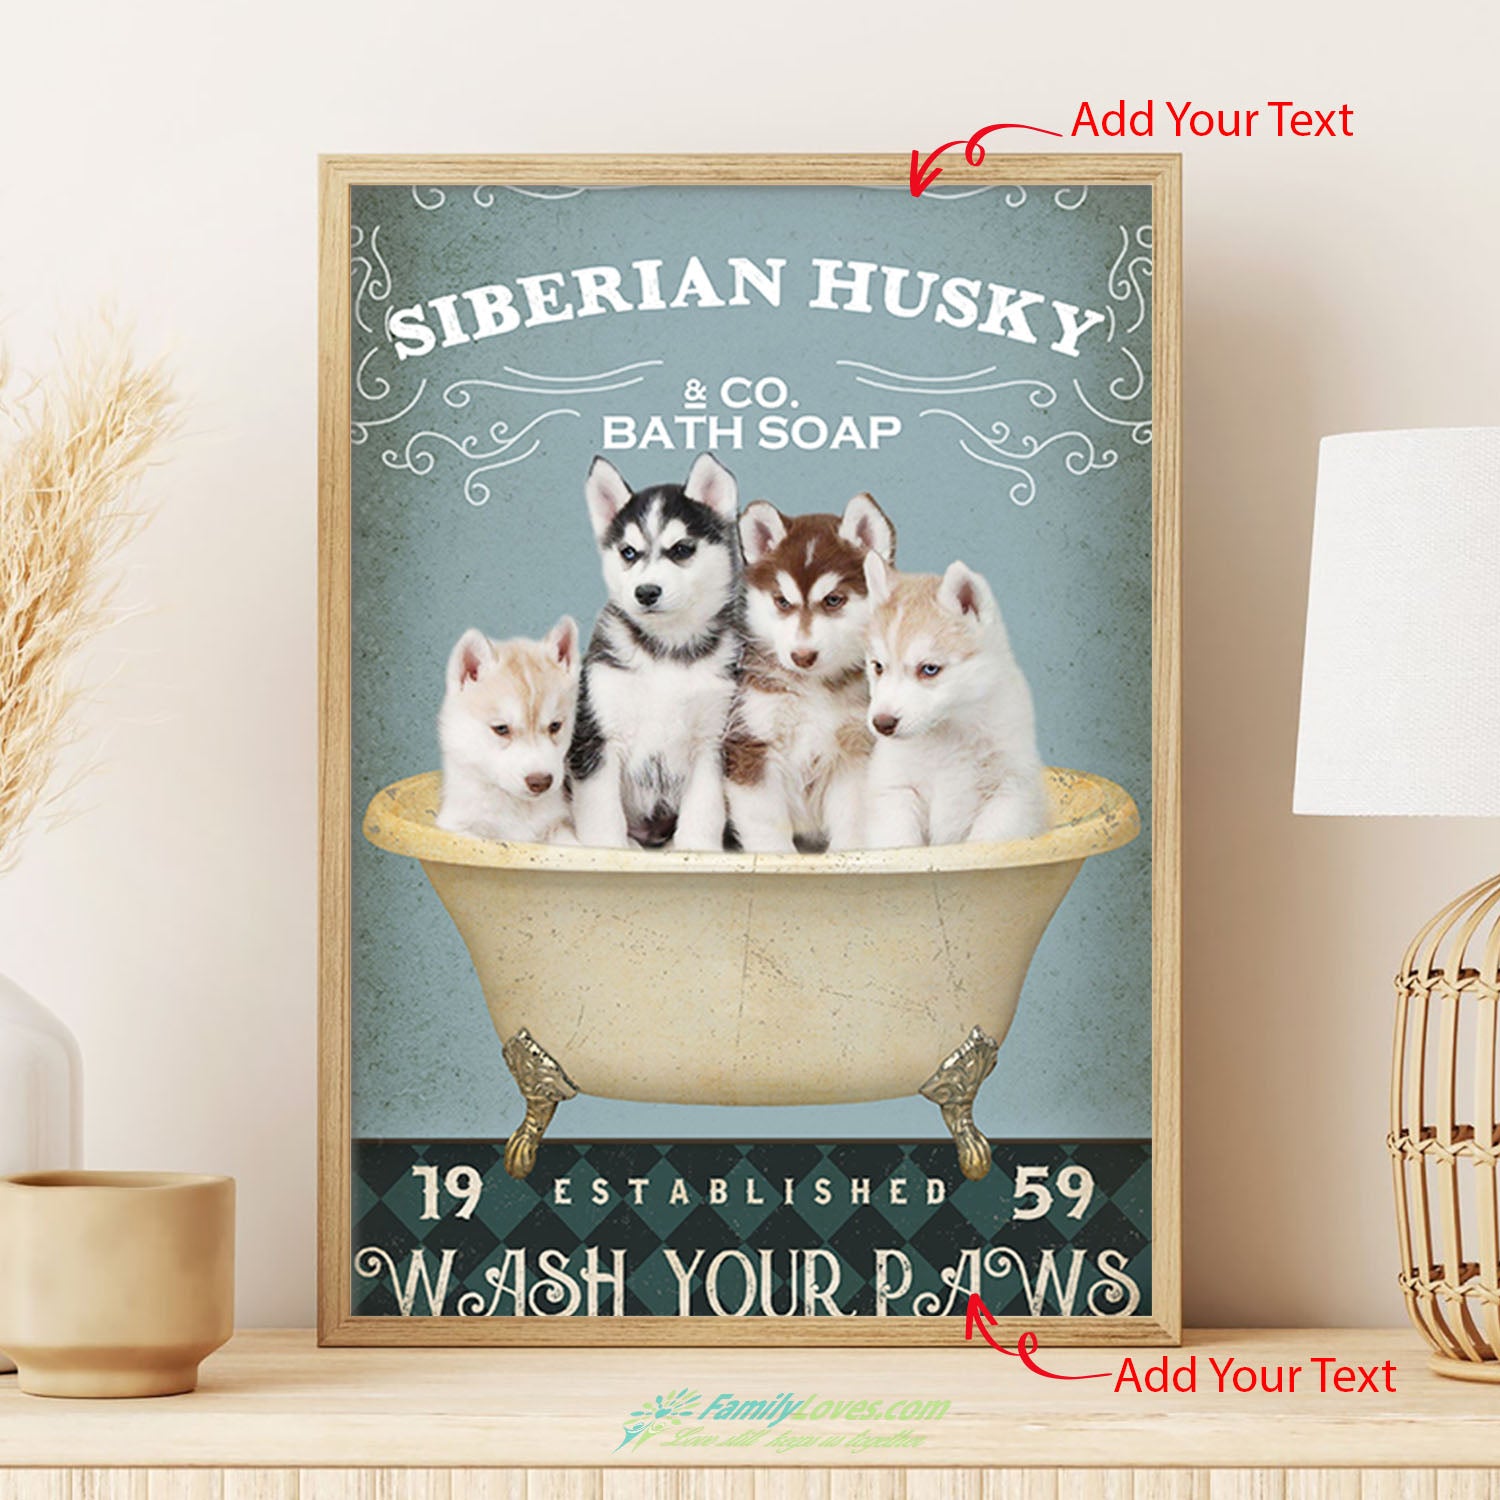 Robina Fancy Siberian Husky Dog Bath Soap Established Wash Your Paws Canvas 48X36 Poster Of A Window All Size 1